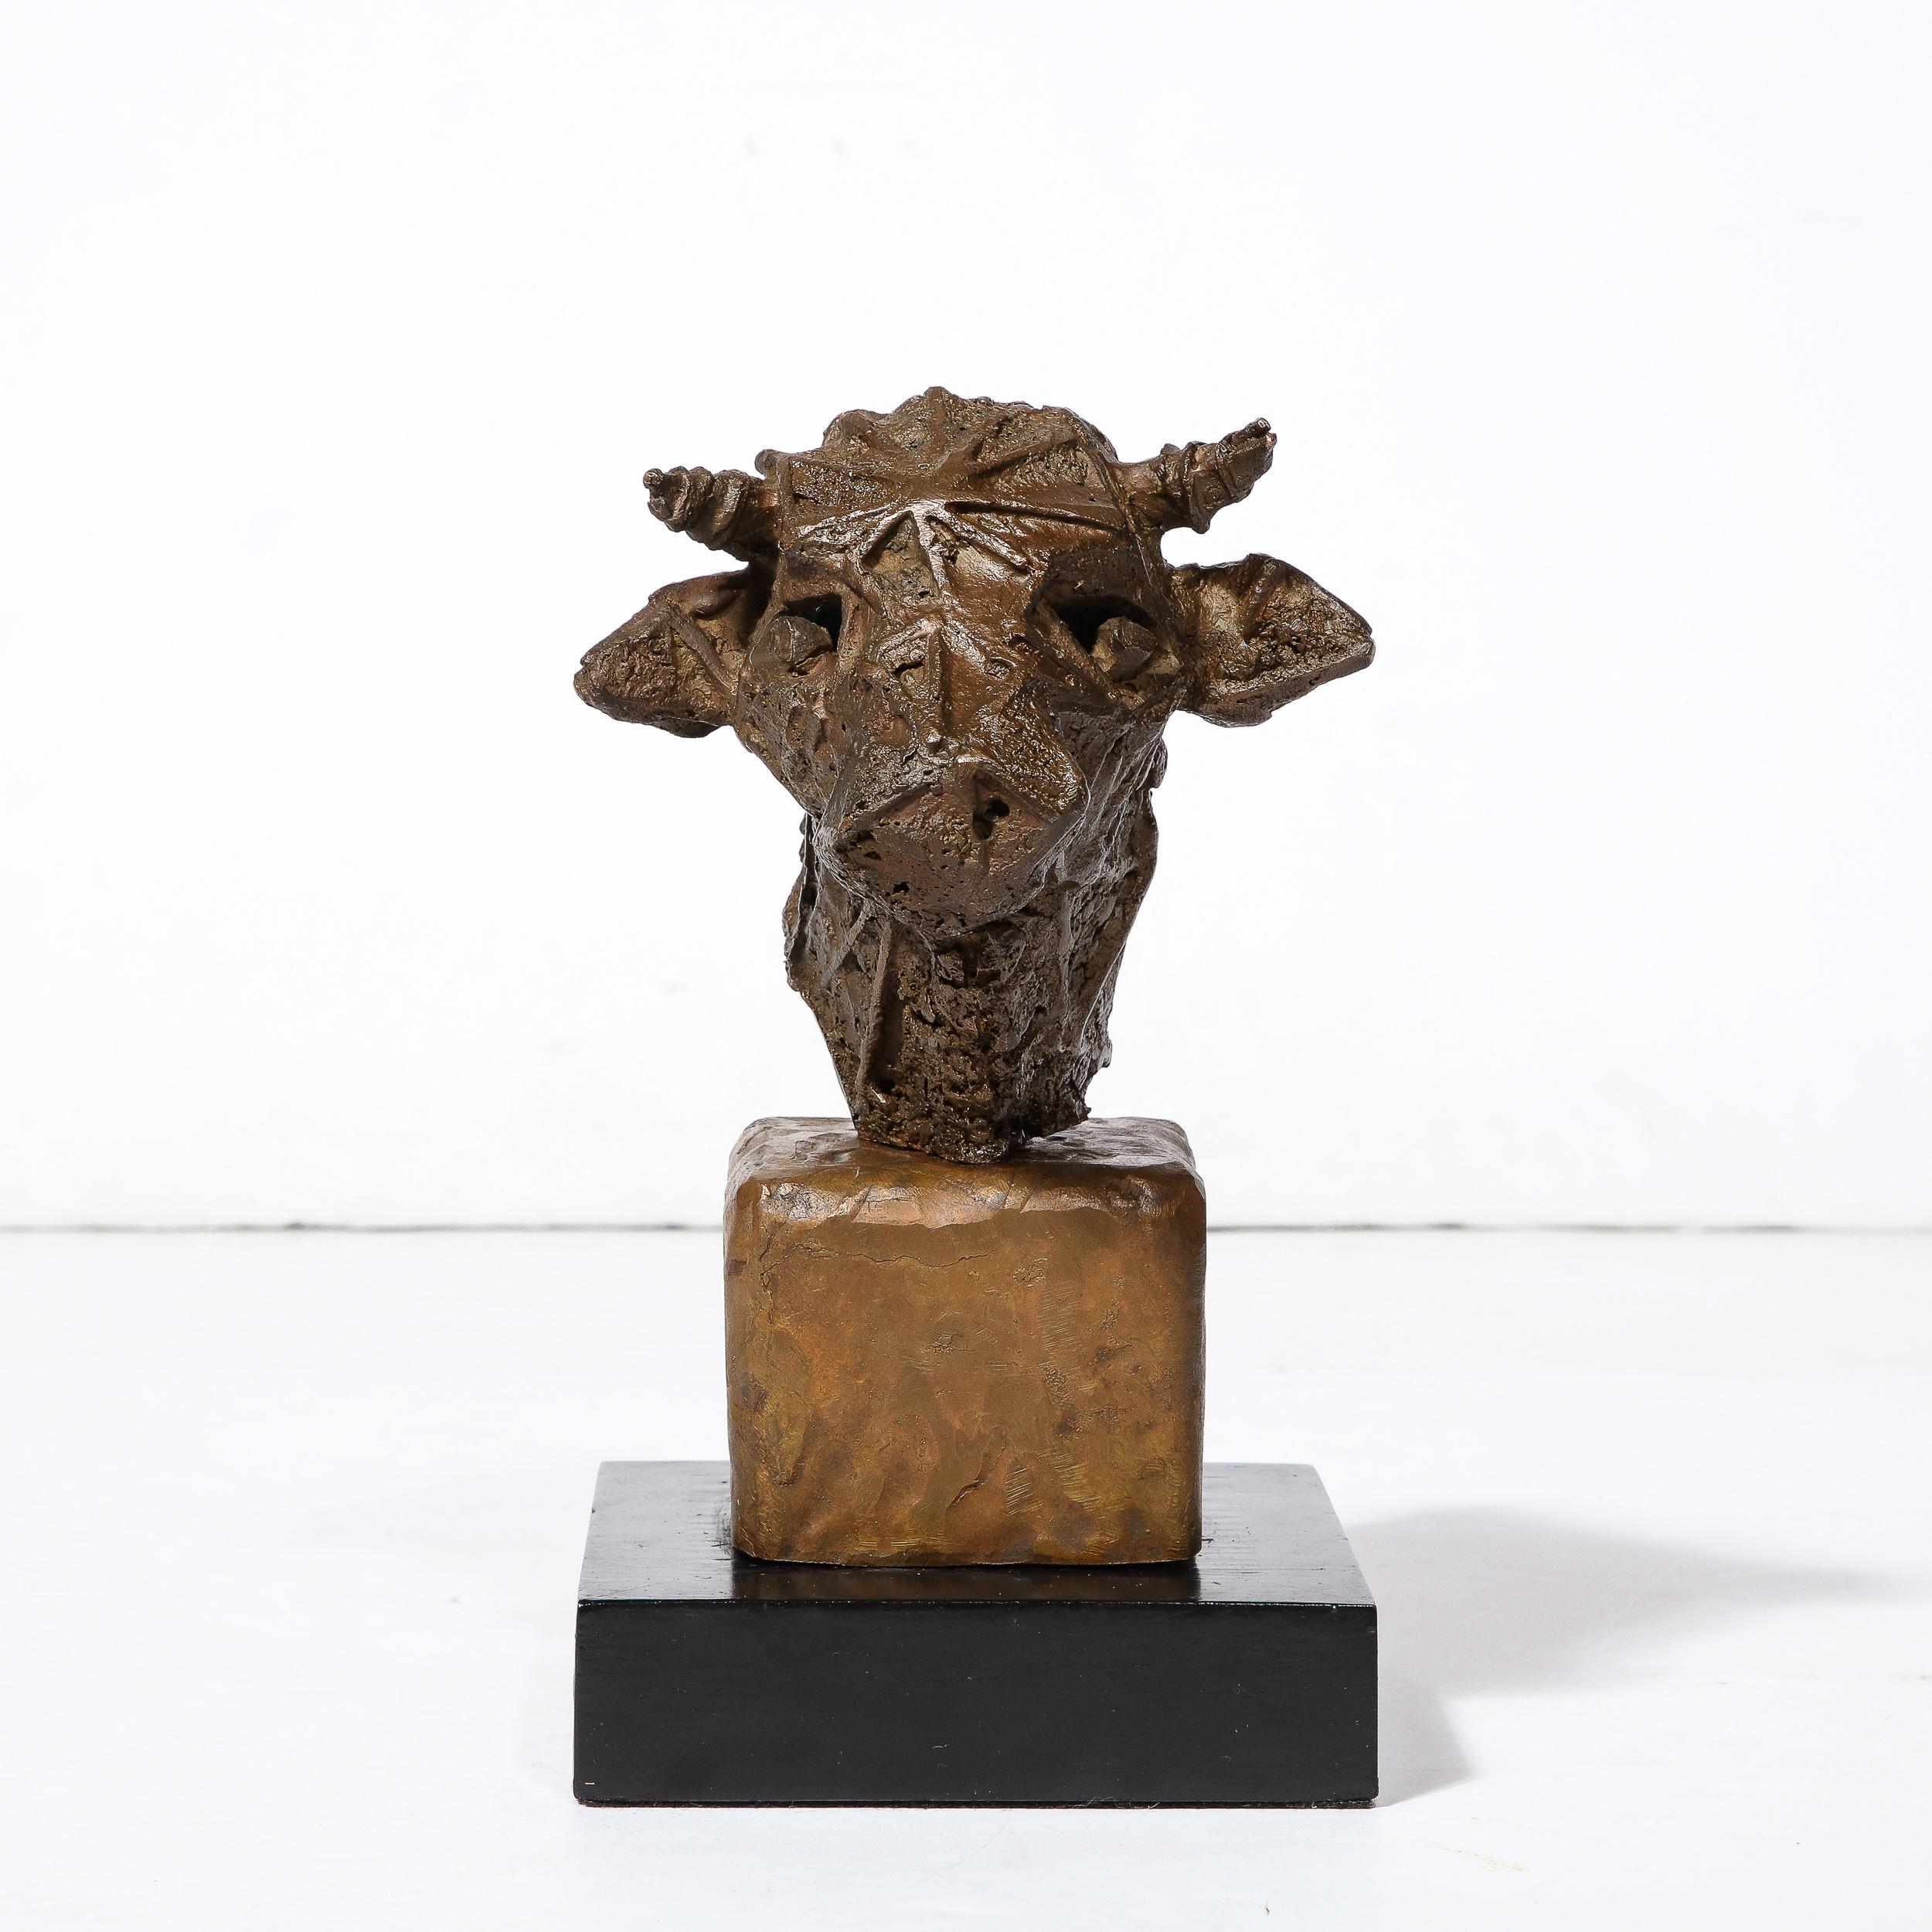 This intrigueing and playful Brutalist Bull's Head Sculpture signed Vlademar Valutis originates from Sweden, created in 1974. Featuring a stylized and texturally intriguing bull's head on a two-part rectilinear base, the maker uses lines of metal to